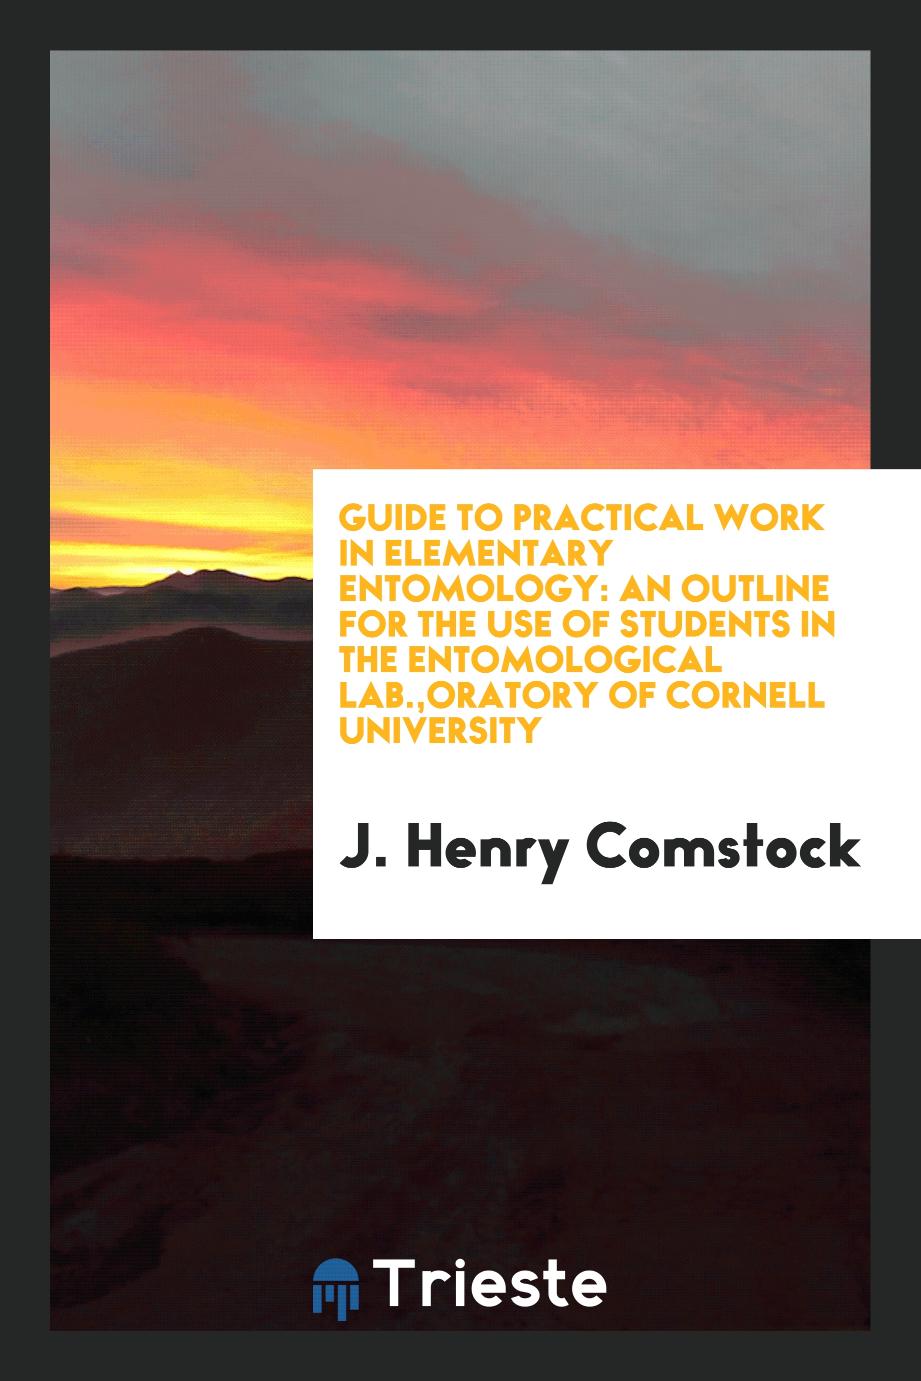 Guide to Practical Work in Elementary Entomology: An Outline for the Use of Students in the entomological lab.,Oratory of Cornell University